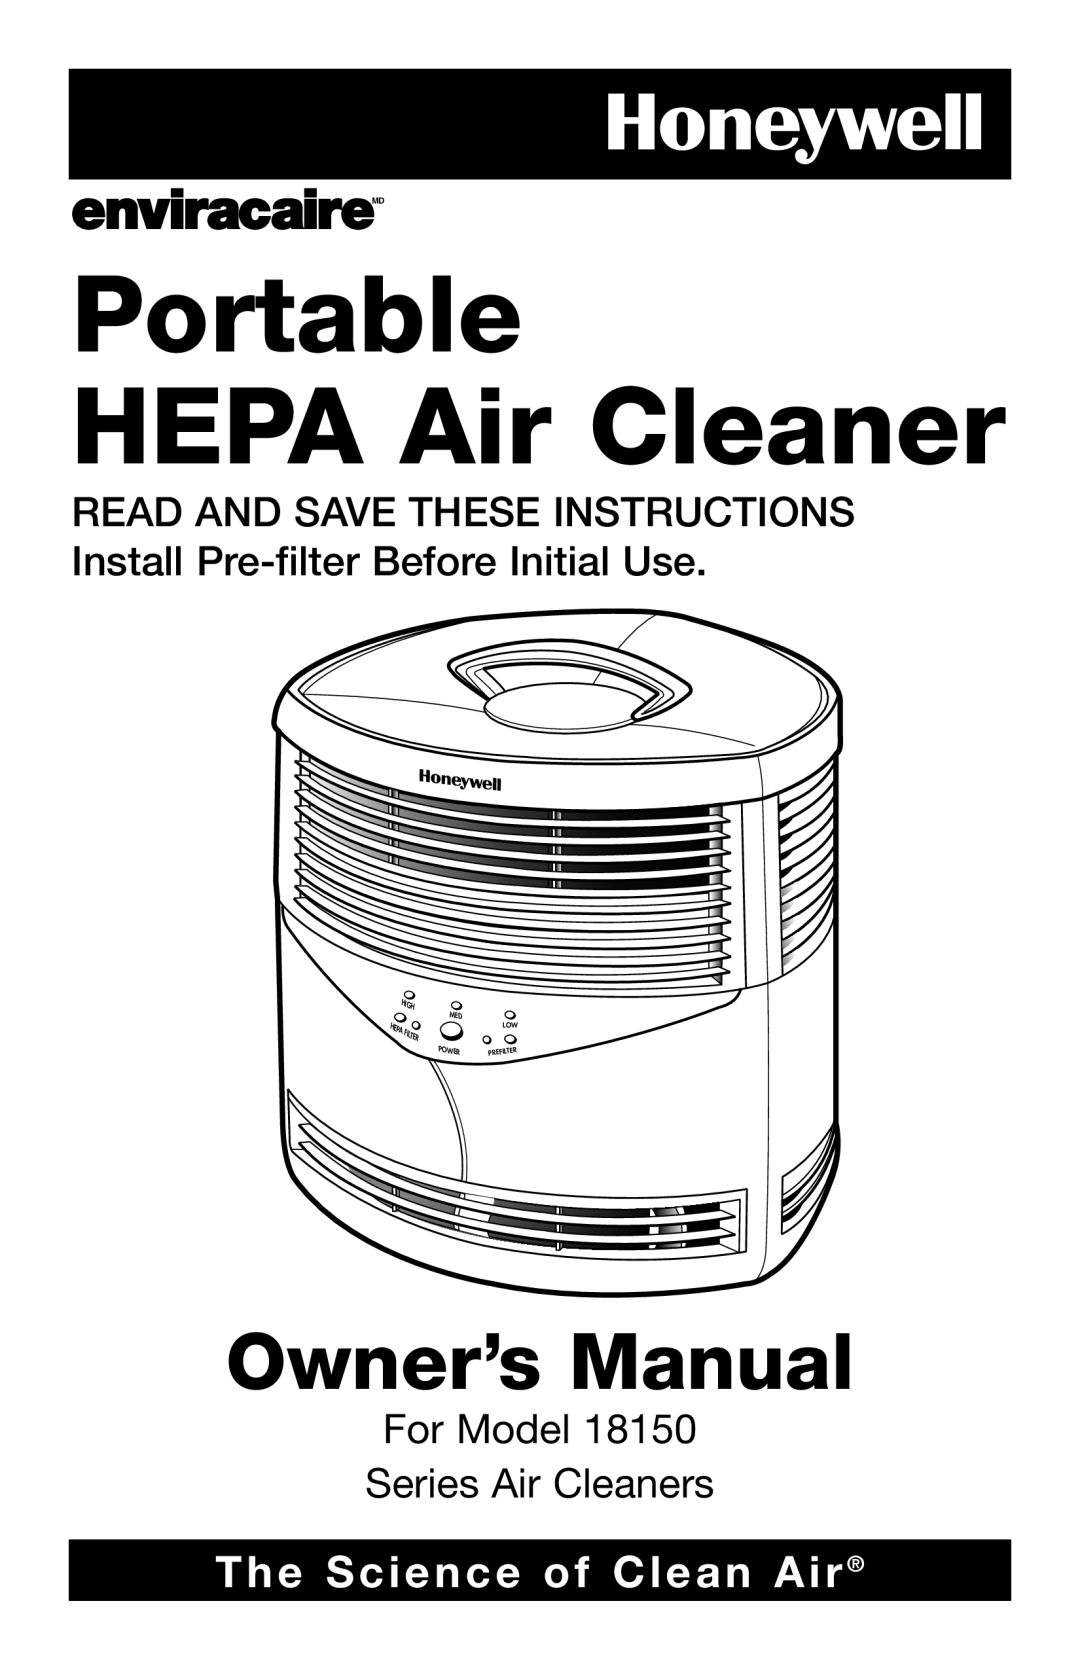 Honeywell 18150 owner manual Portable HEPA Air Cleaner, The Science of Clean Air, For Model Series Air Cleaners, Filter 